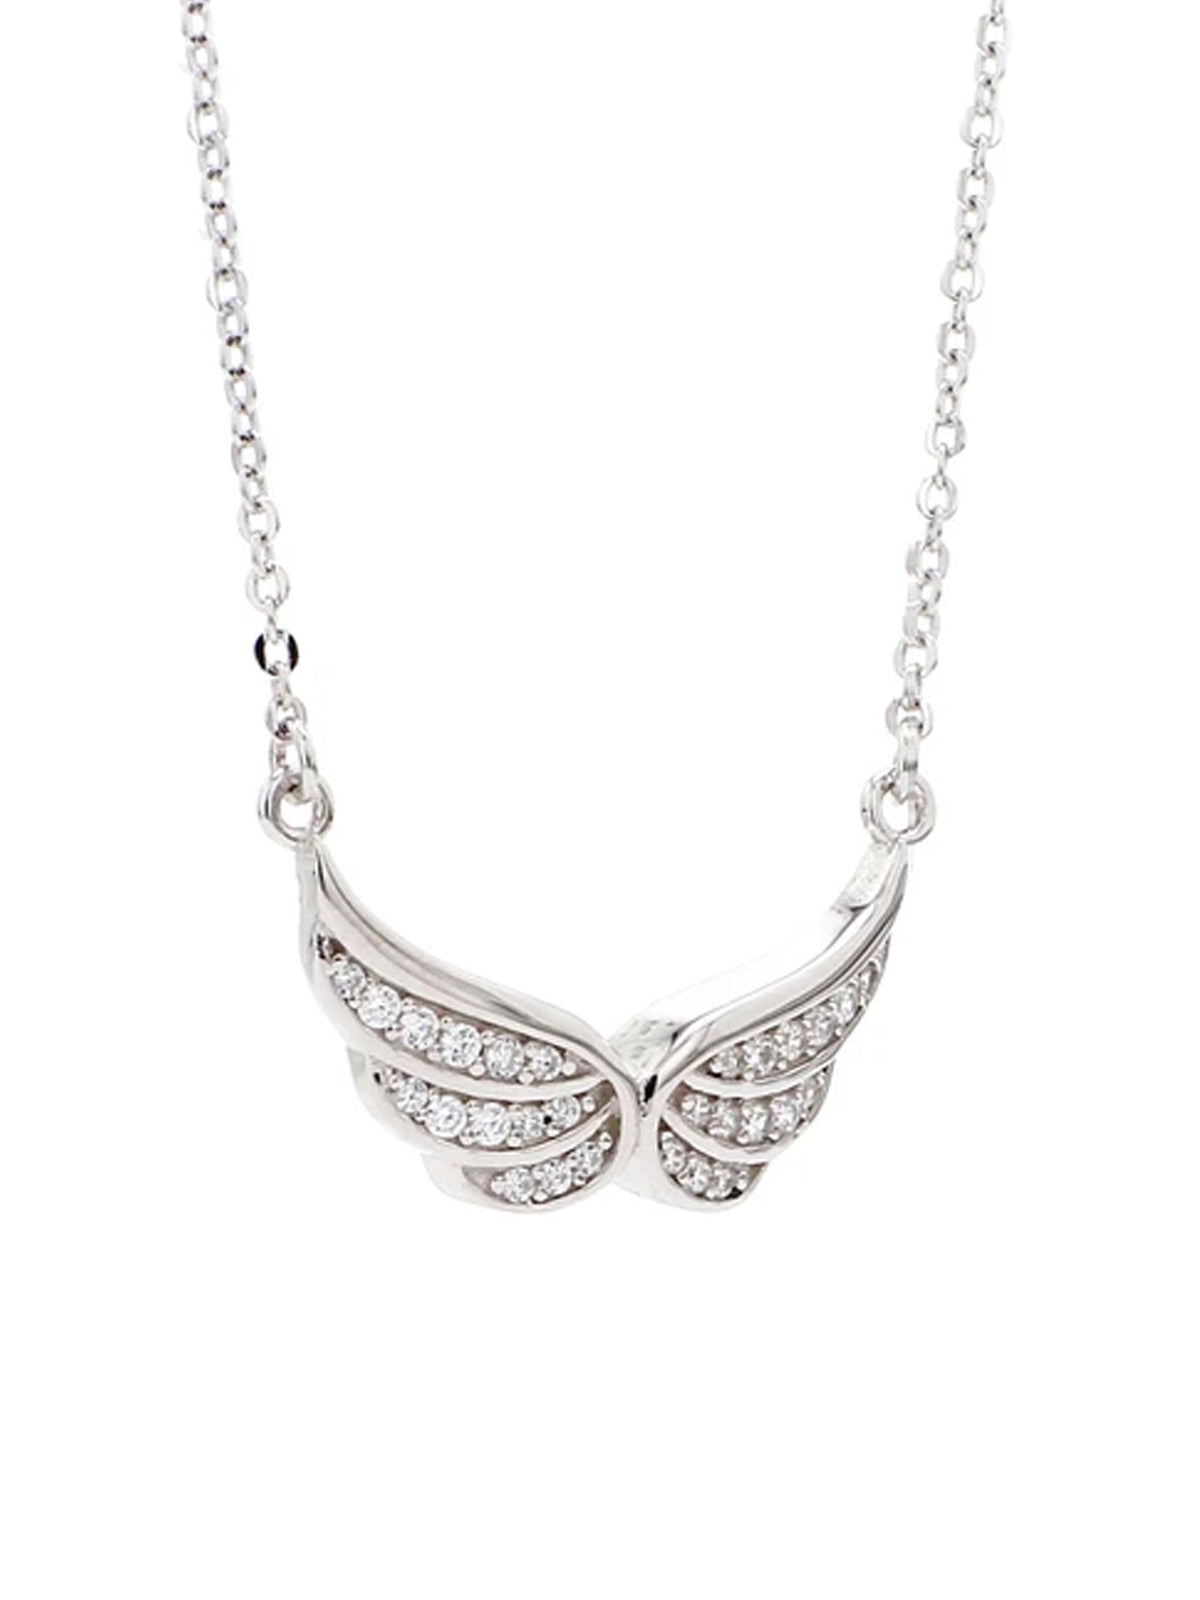 SILVER ANGEL WINGS NECKLACE IN AMERICAN DIAMOND AT ORNATE JEWELS-4